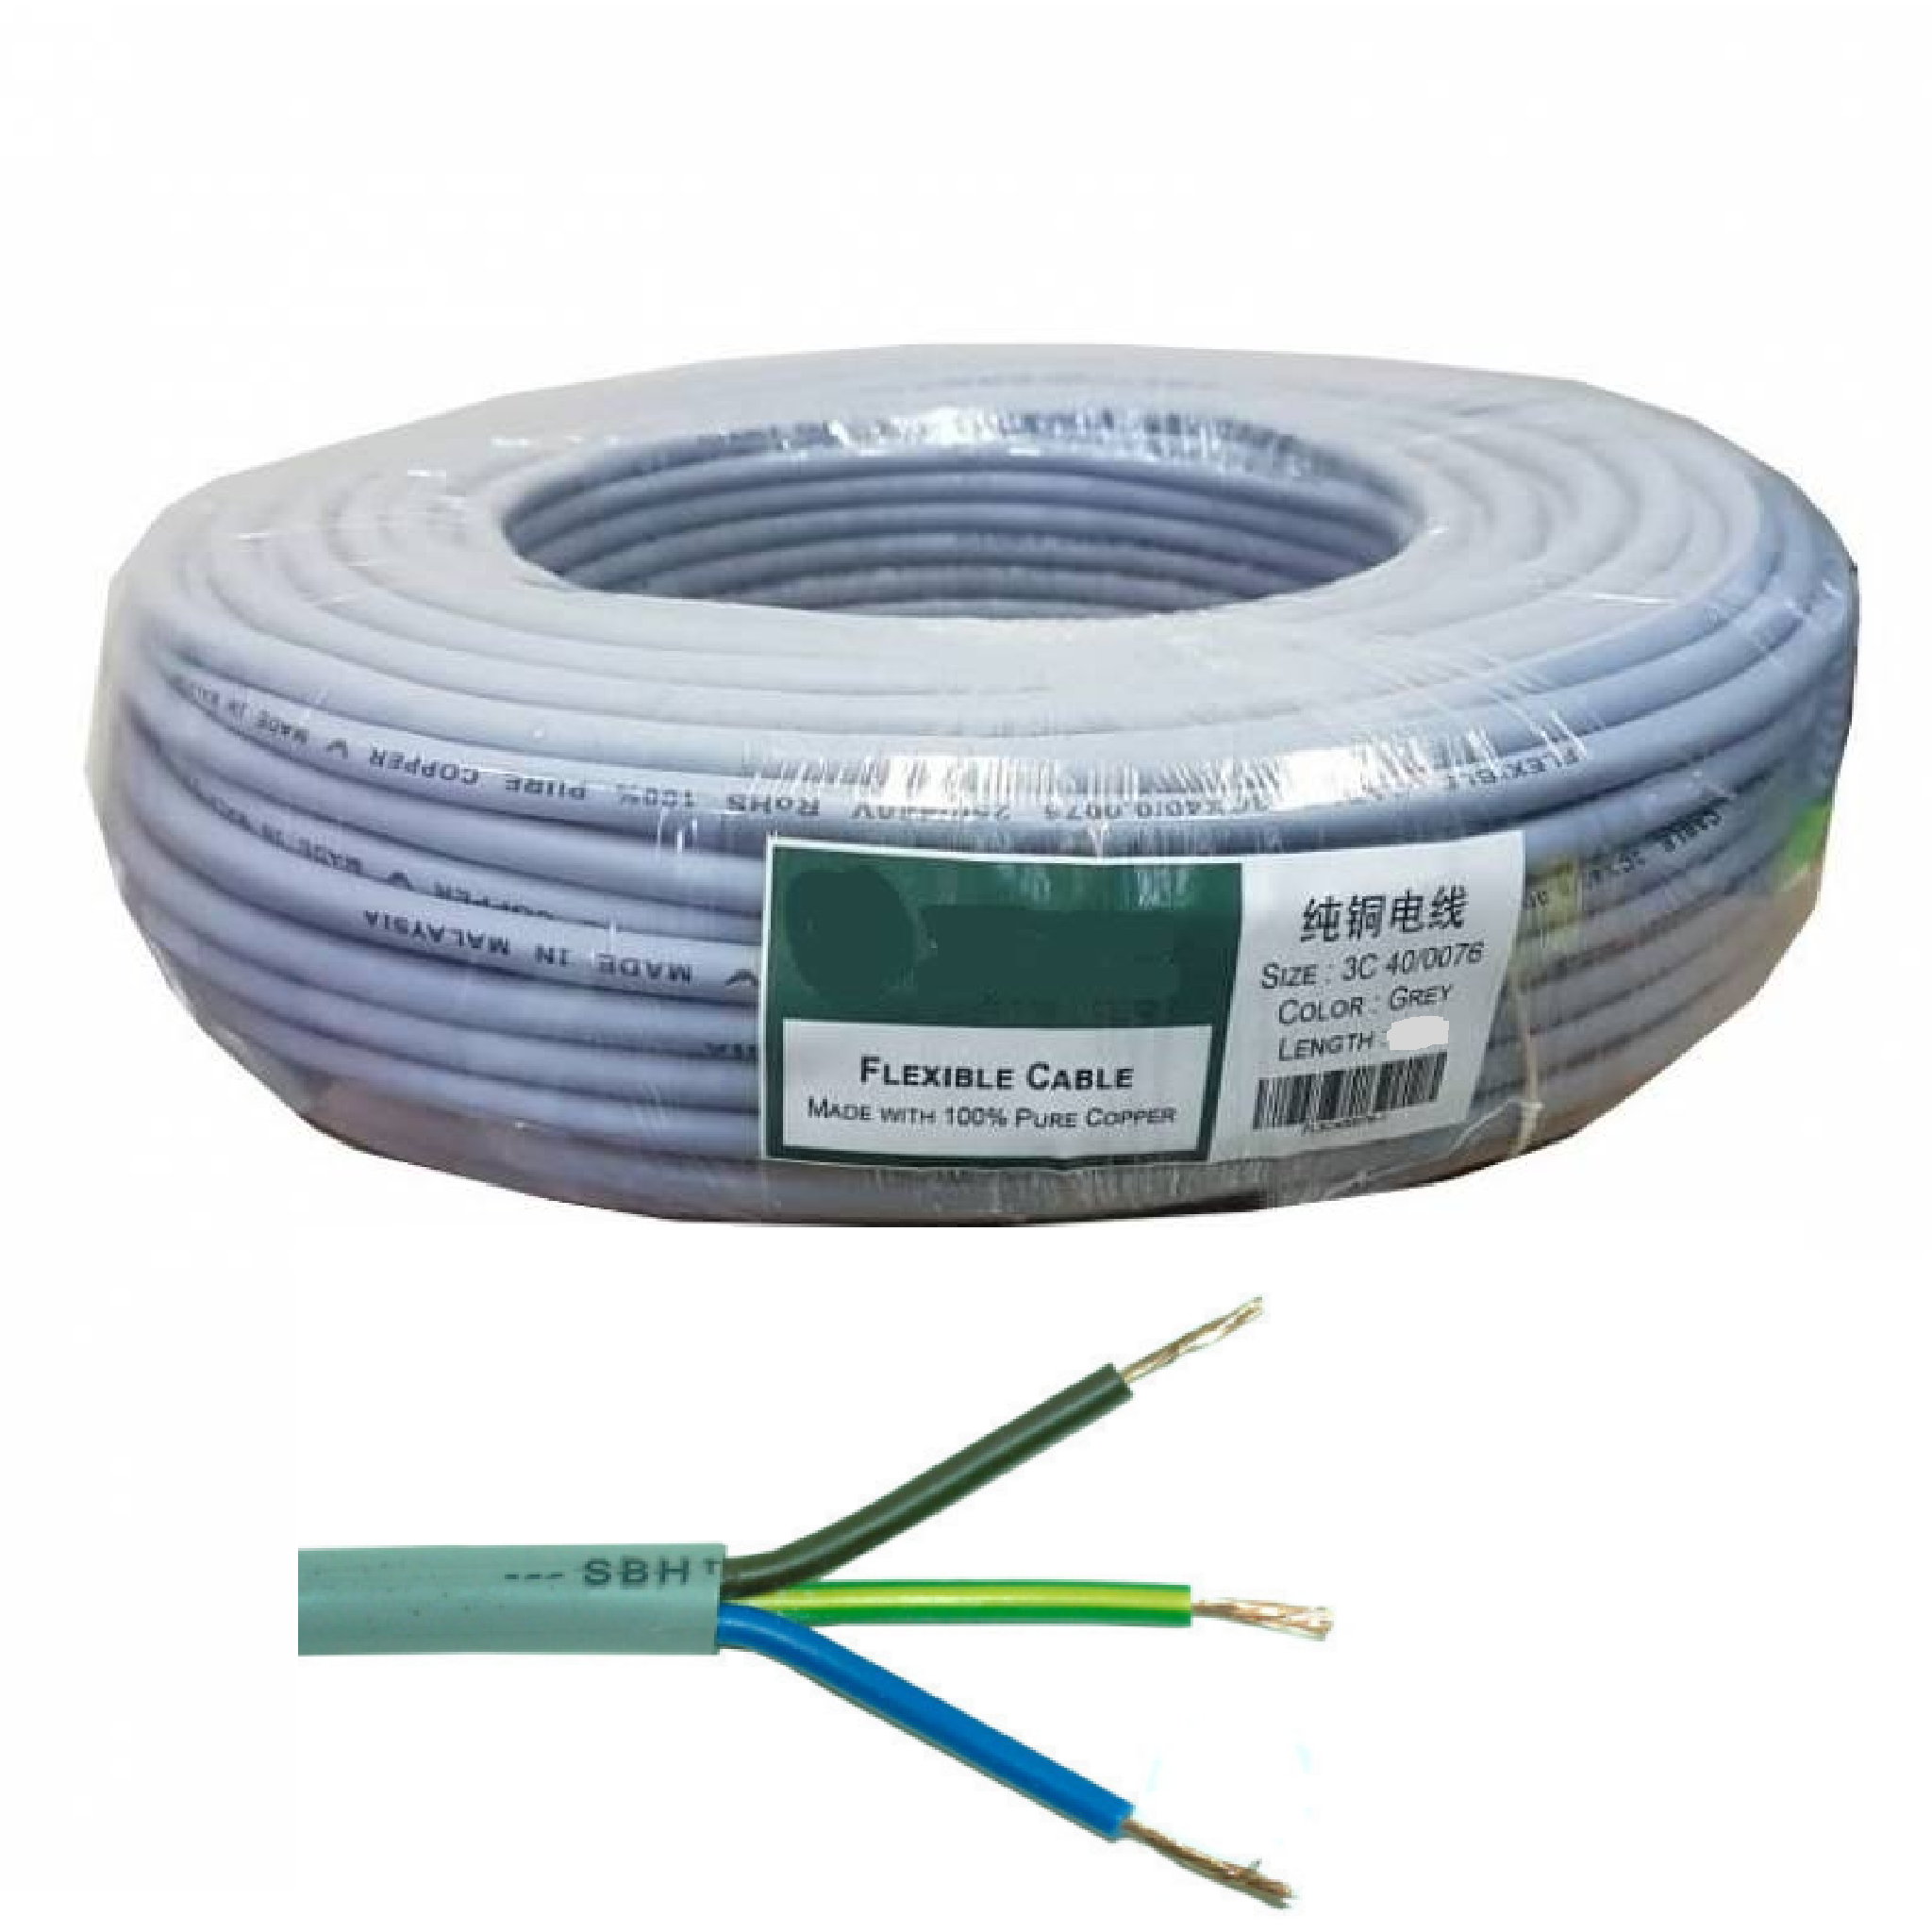 CAVICO 3 CORE Electrical Cable 3C/70YR X 35M GREY